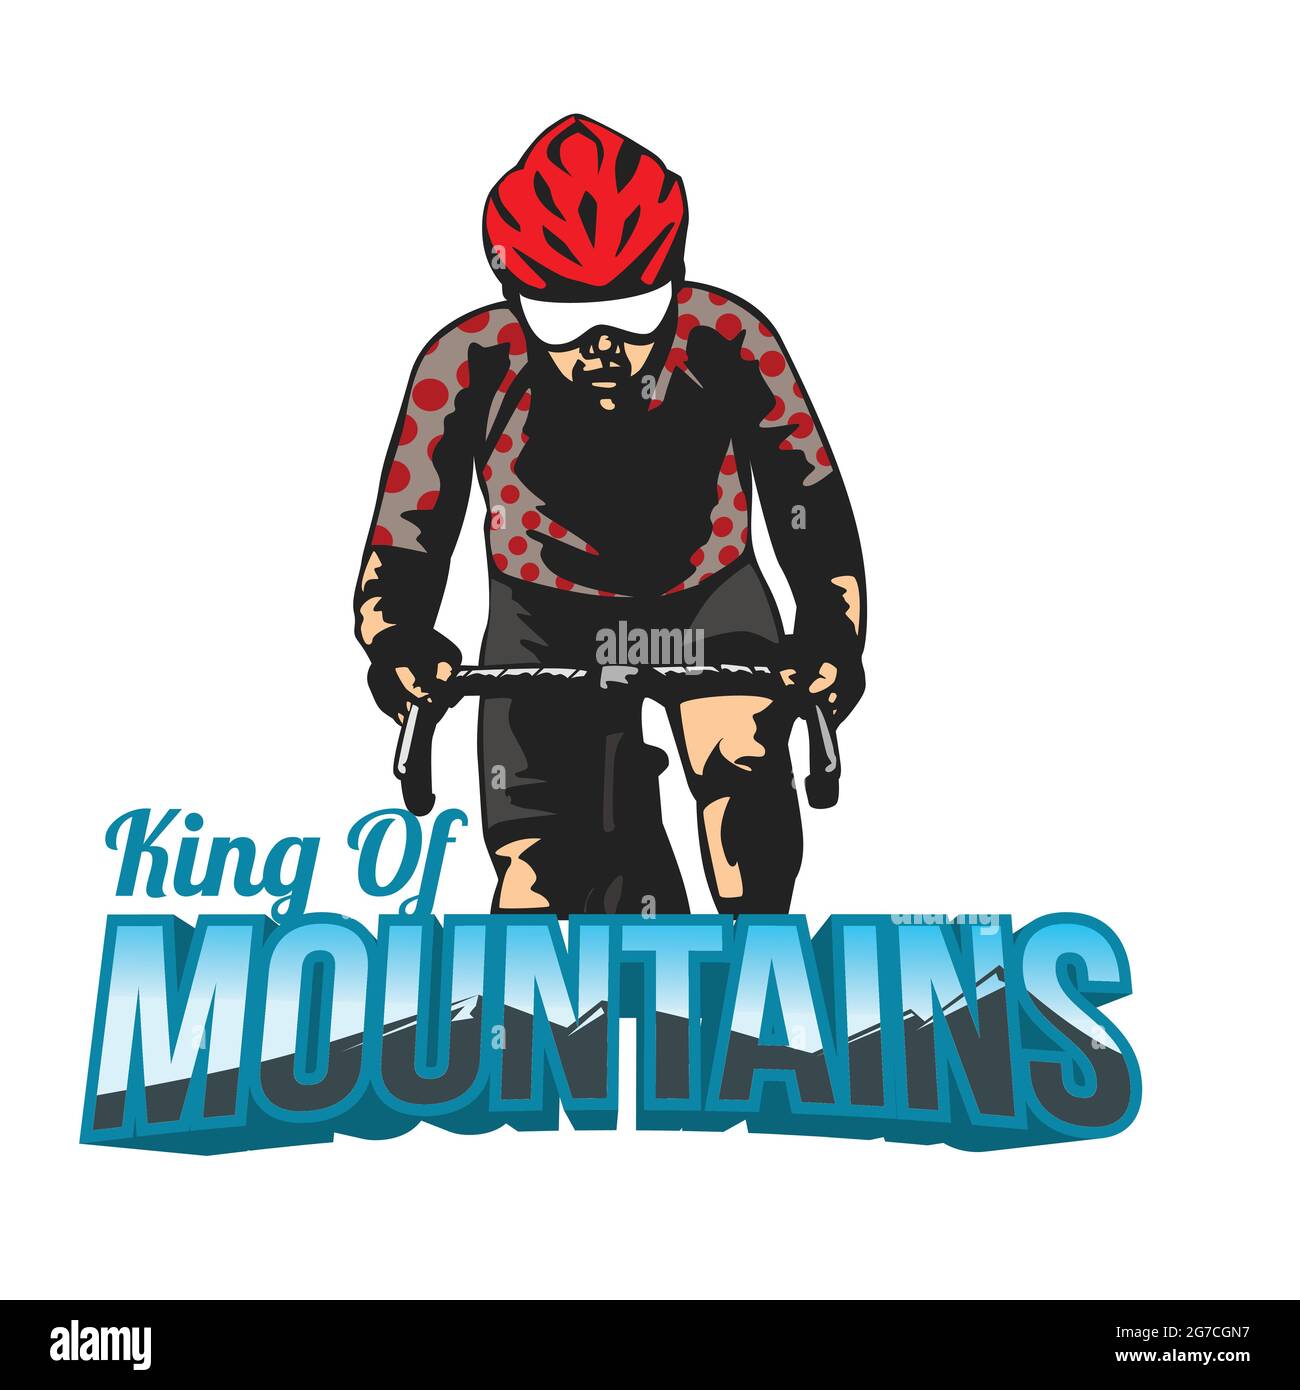 King of Mountains (KoM). best road cycling mountain climber. cyclist in polka dot jersey vector illustration Stock Vector